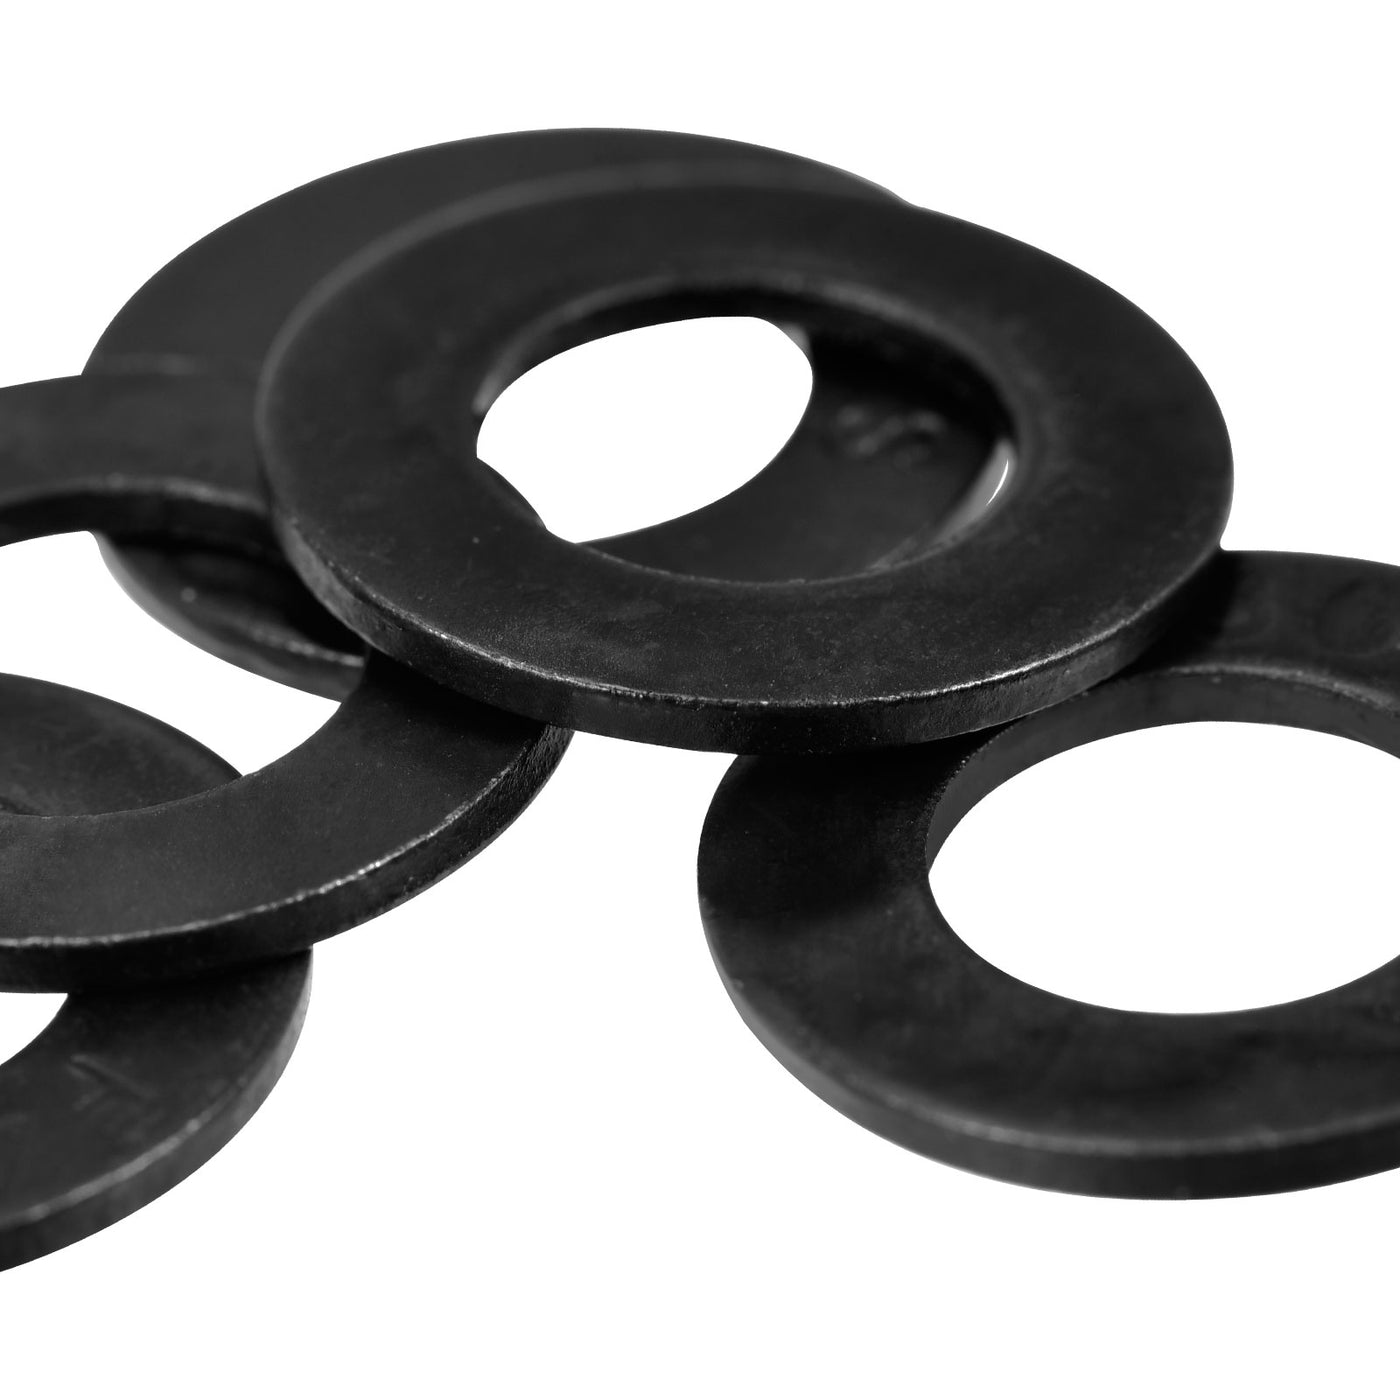 uxcell Uxcell 1/2-Inch Flat Washer, Alloy Steel Black Oxide Finish Pack of 50